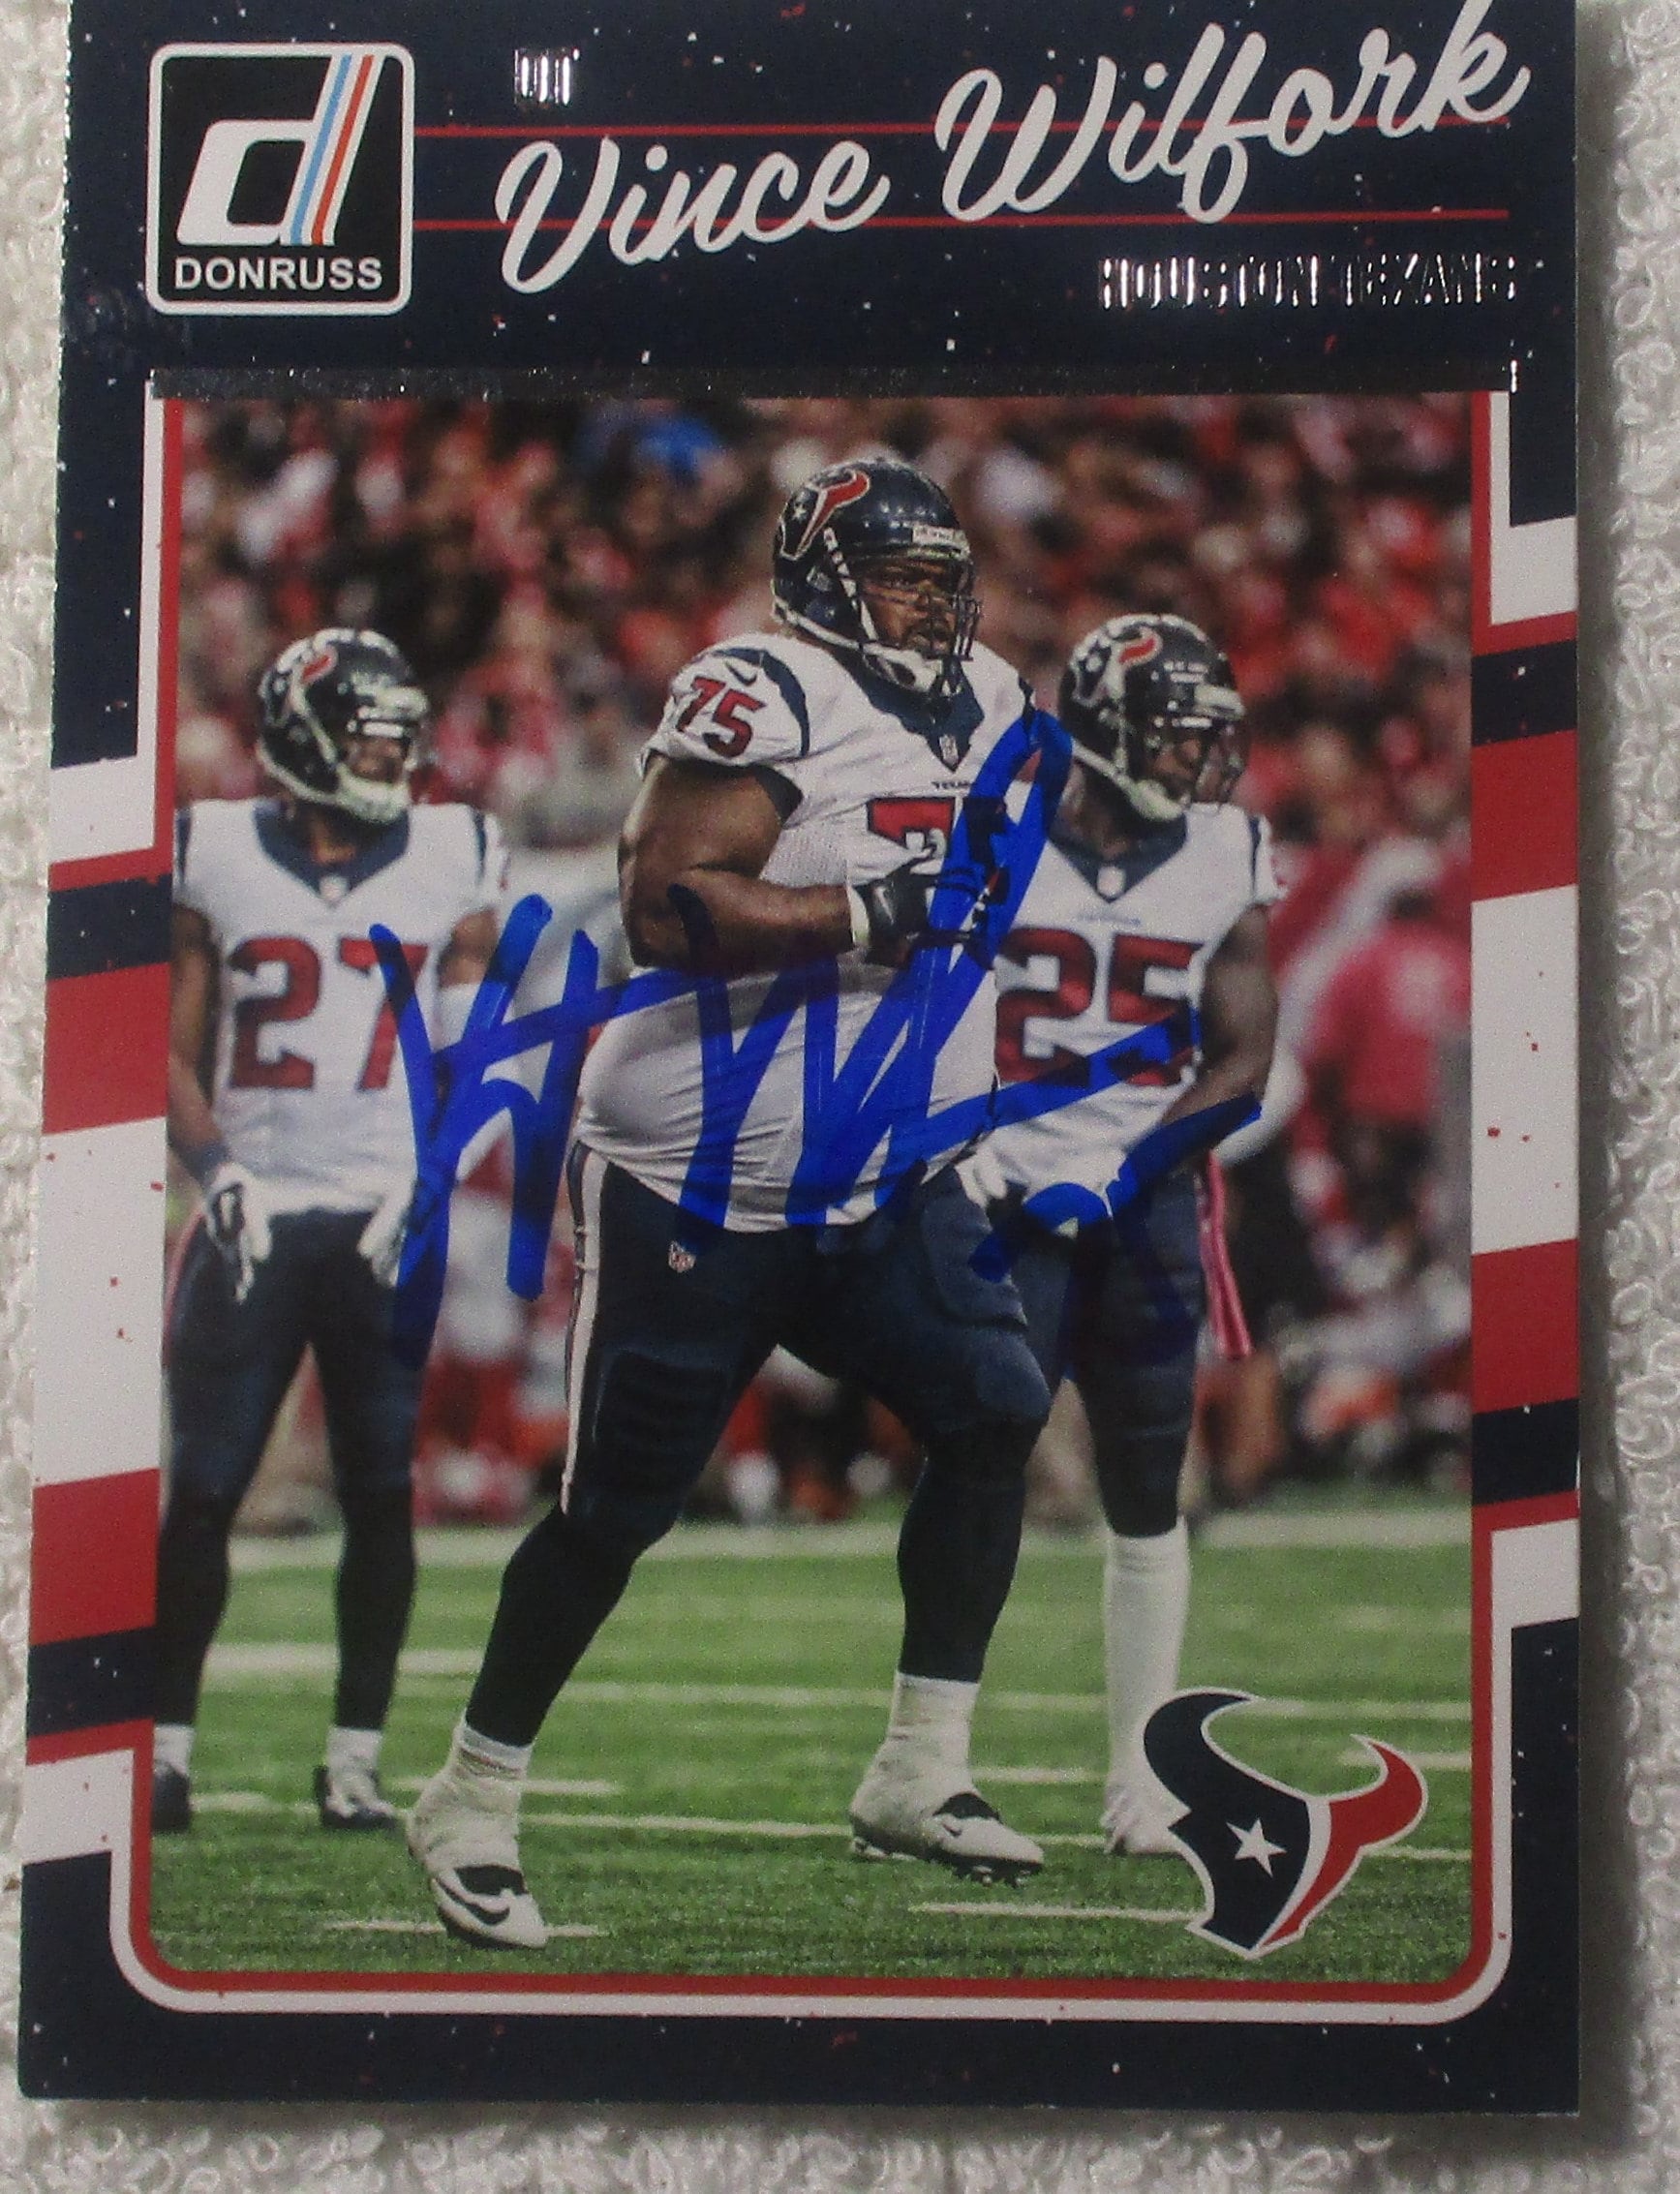 Vince Wilfork Autographed Memorabilia  Signed Photo, Jersey, Collectibles  & Merchandise